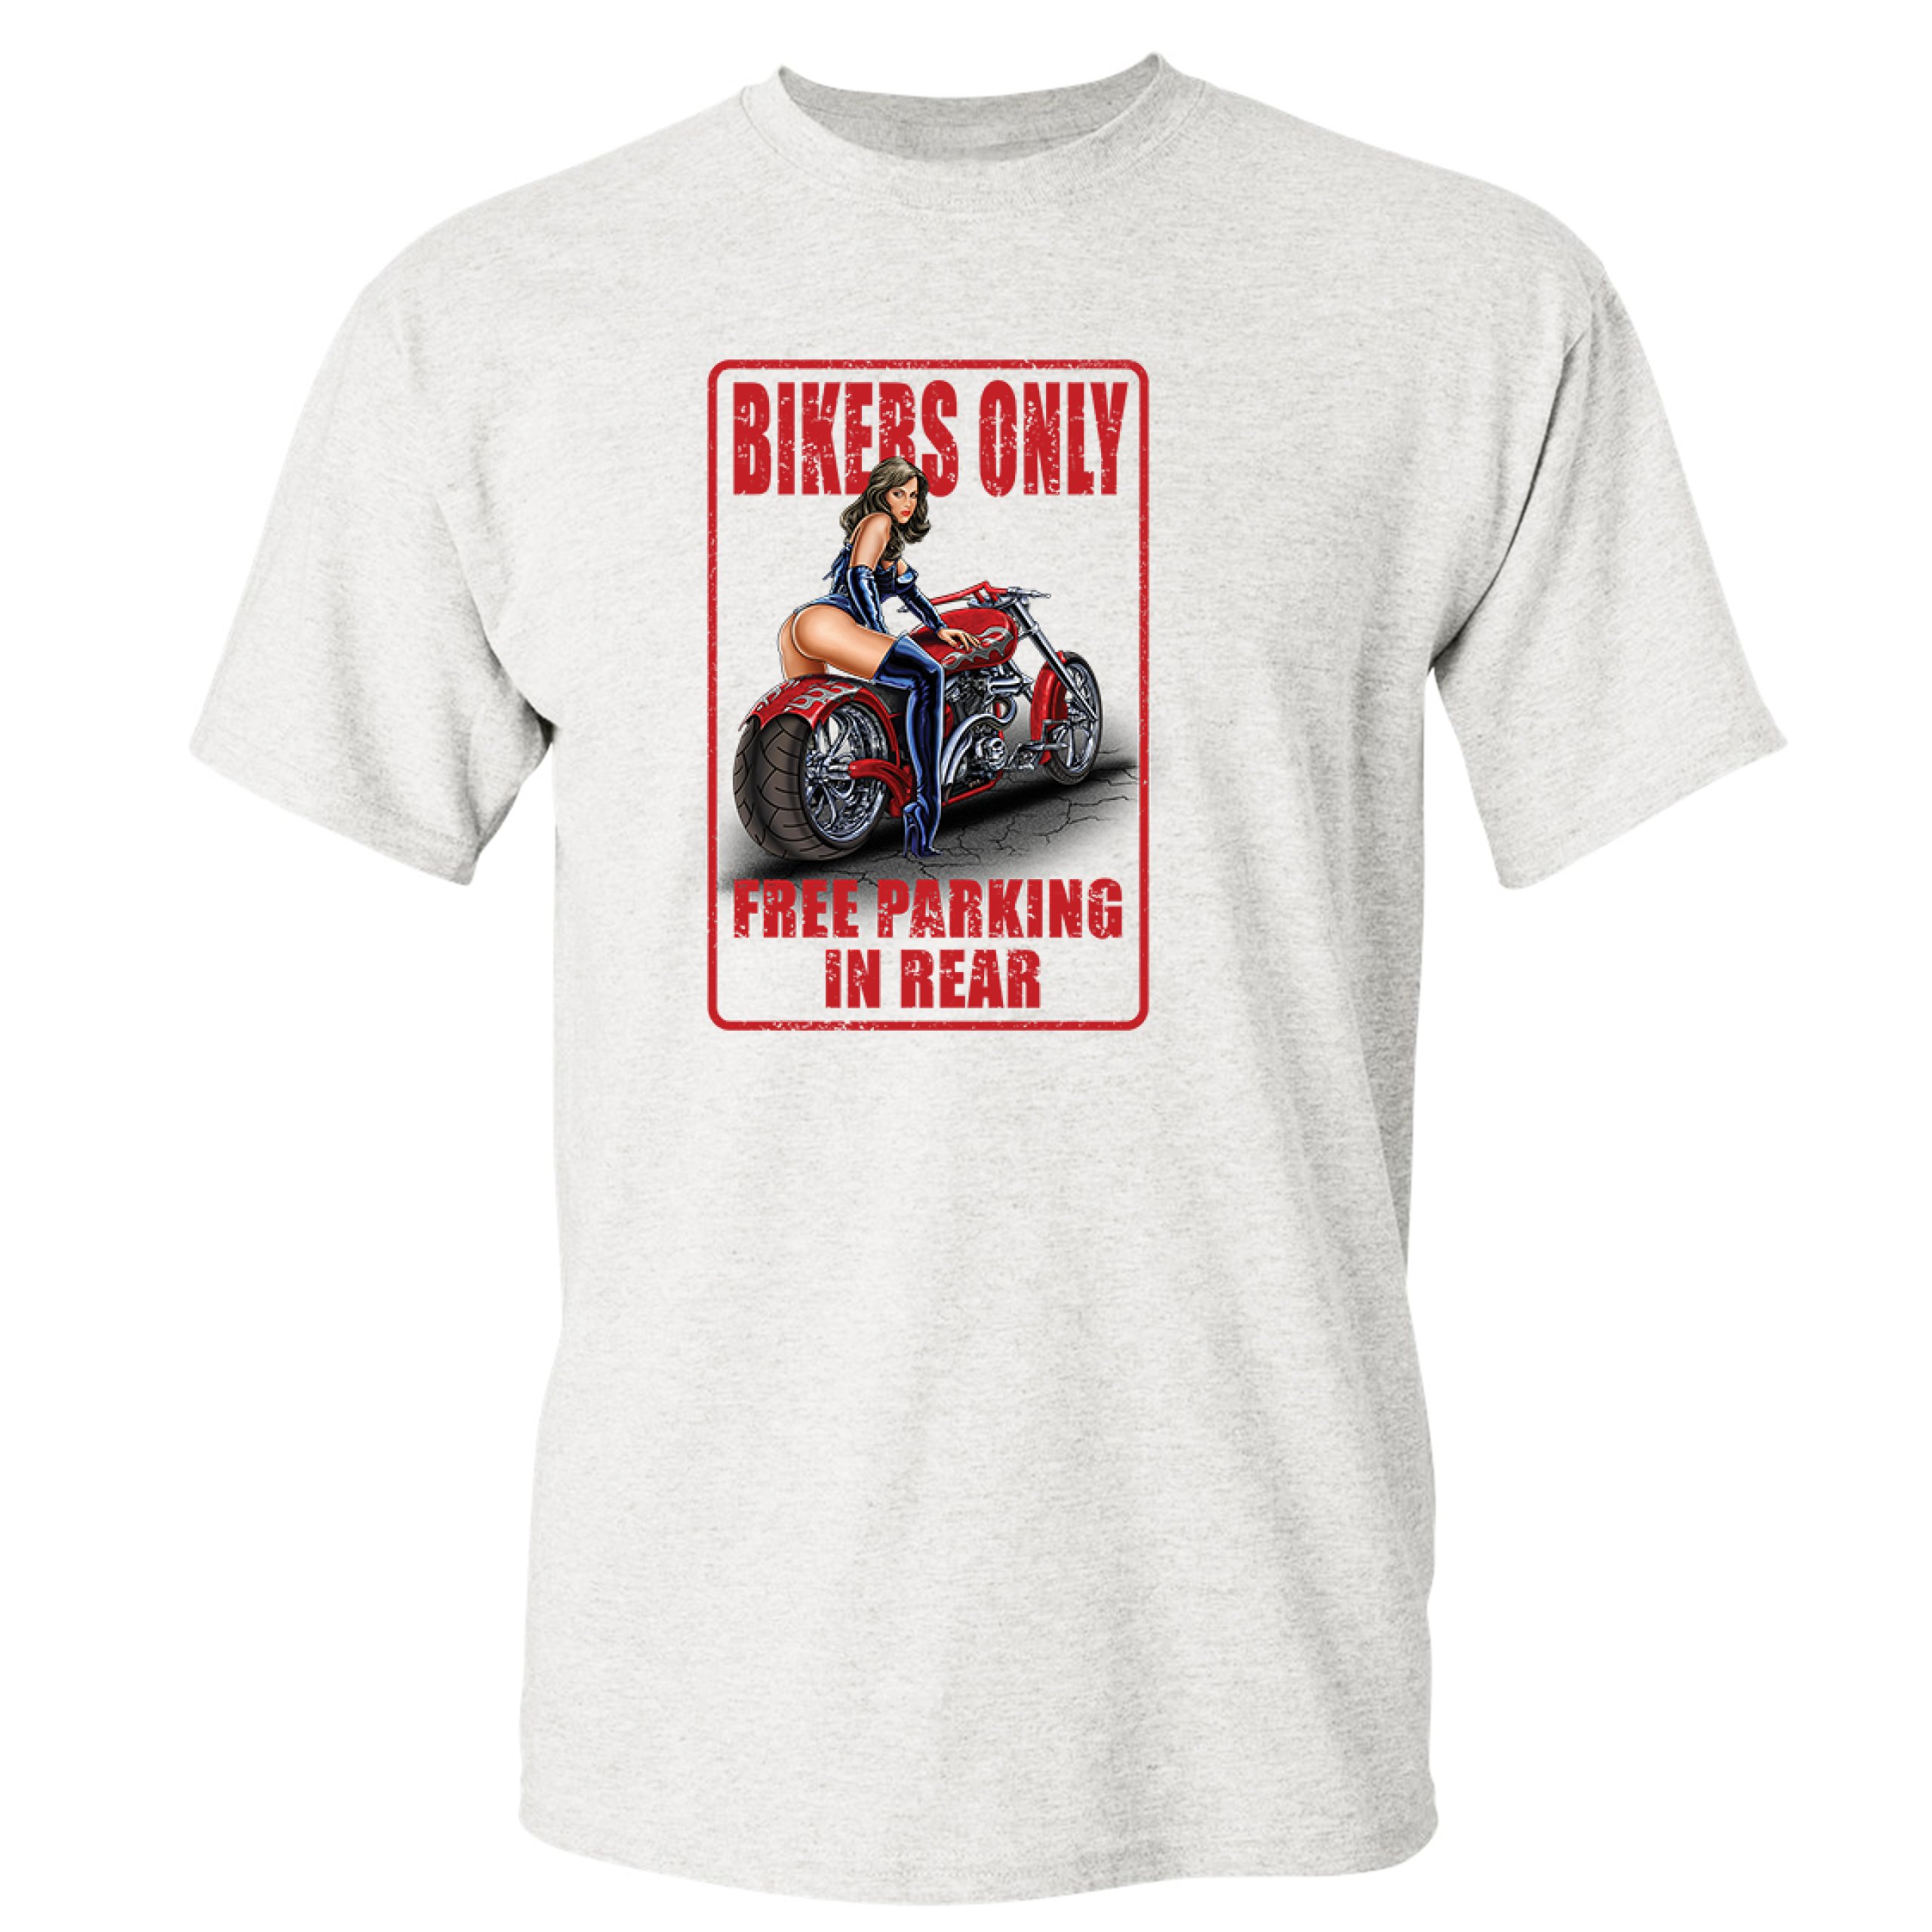 Bikers Only Free Parking In Rear T-shirt Funny Pin-Up Biker Chick Men's ...